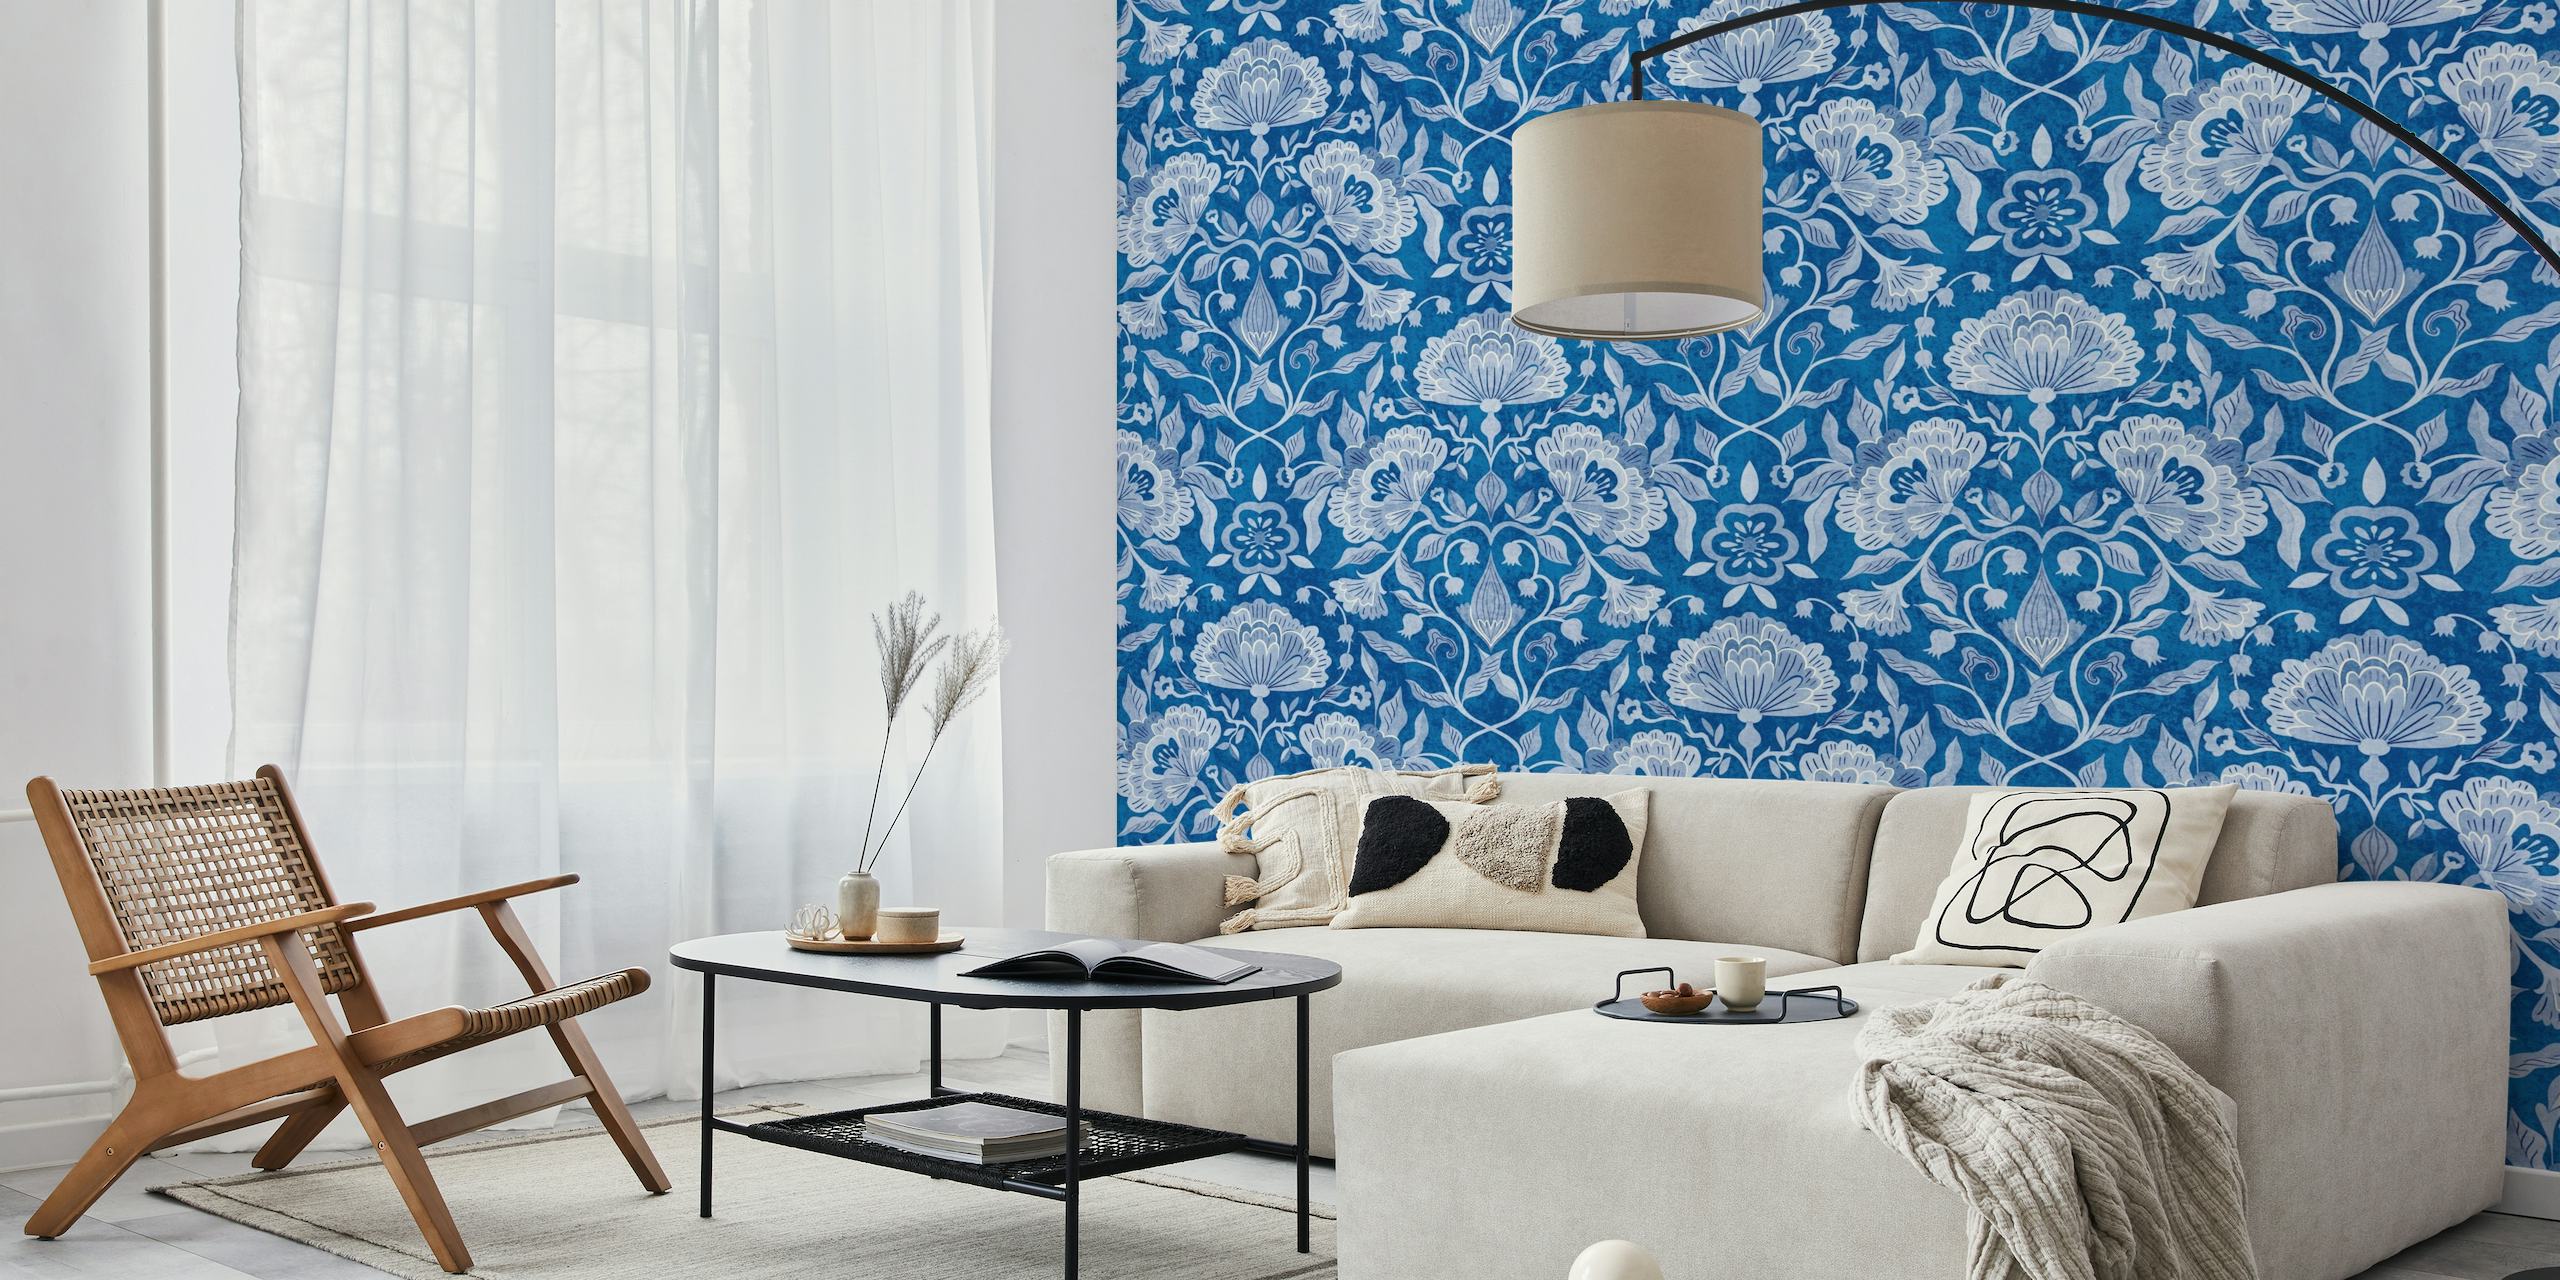 Peonies damask florals blue white ταπετσαρία